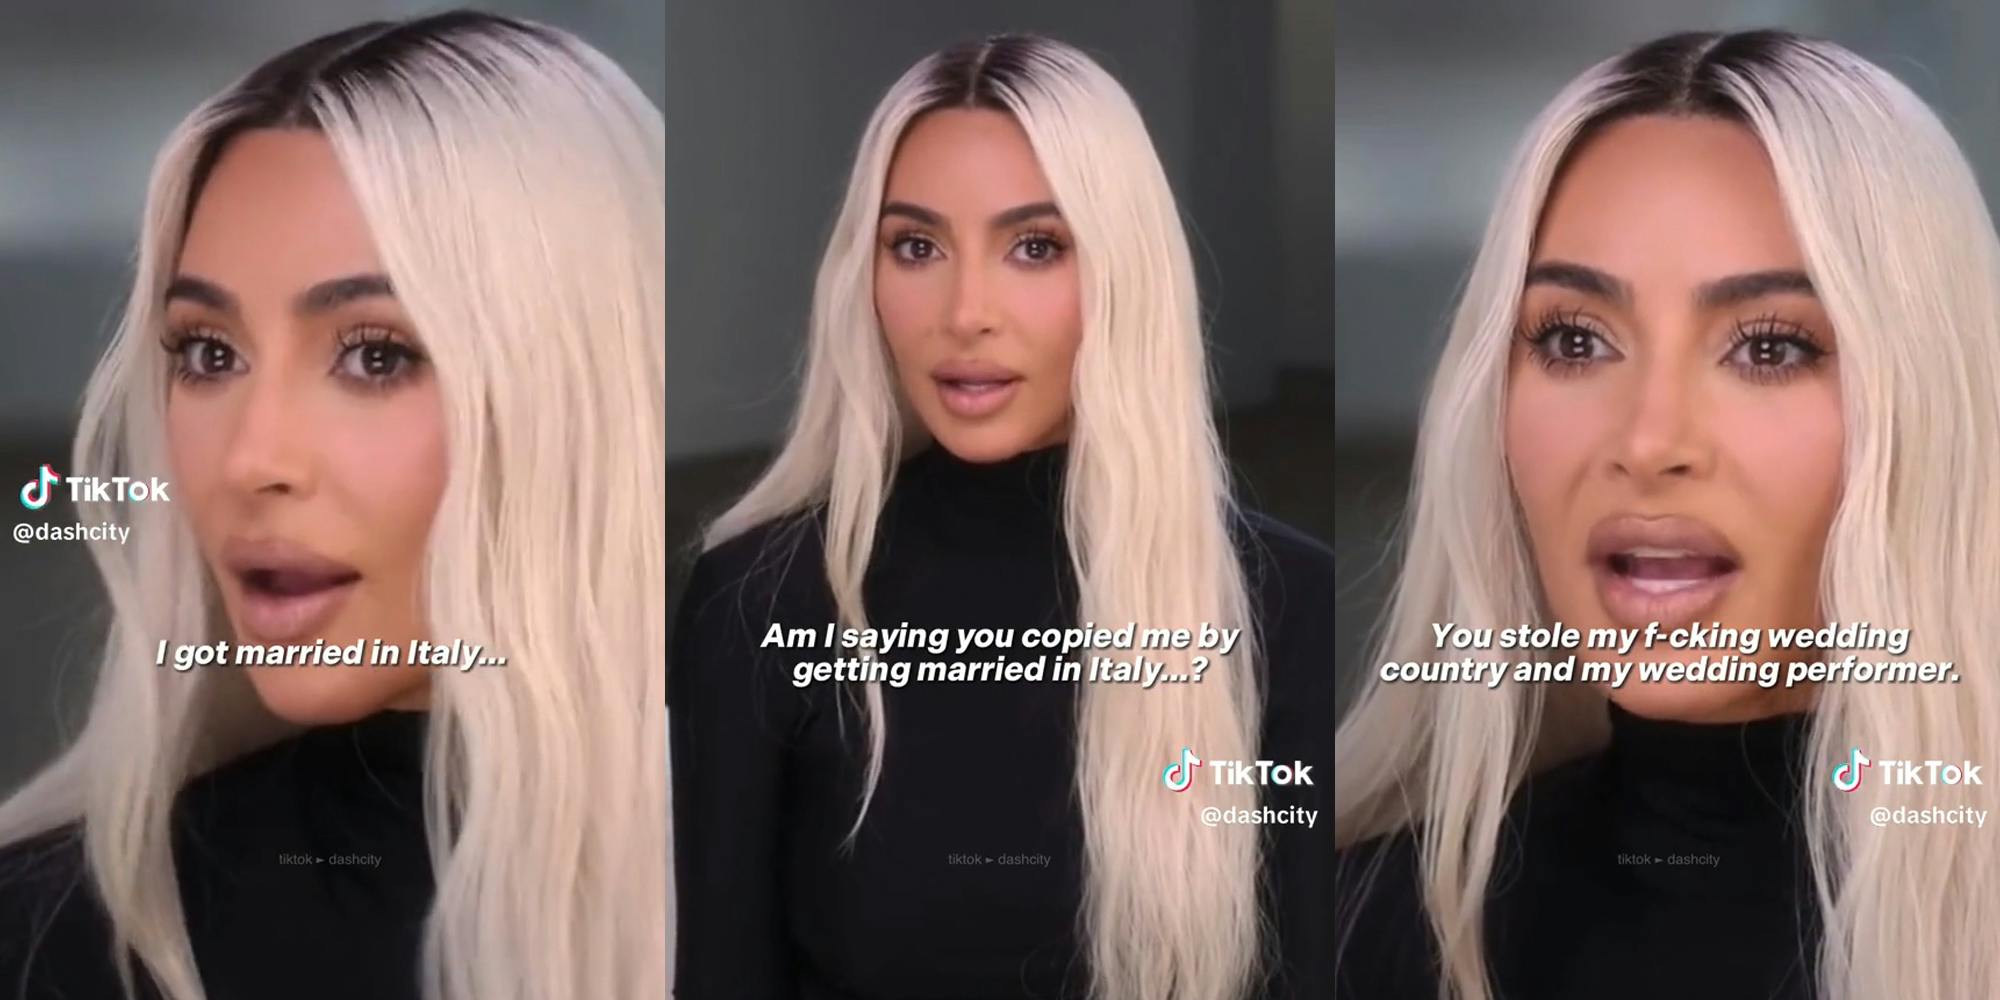 kardashian with captions "I got married in Italy.. Am I saying you copied me by getting married in Italy? You stole my f-cking wedding country and my wedding performer."